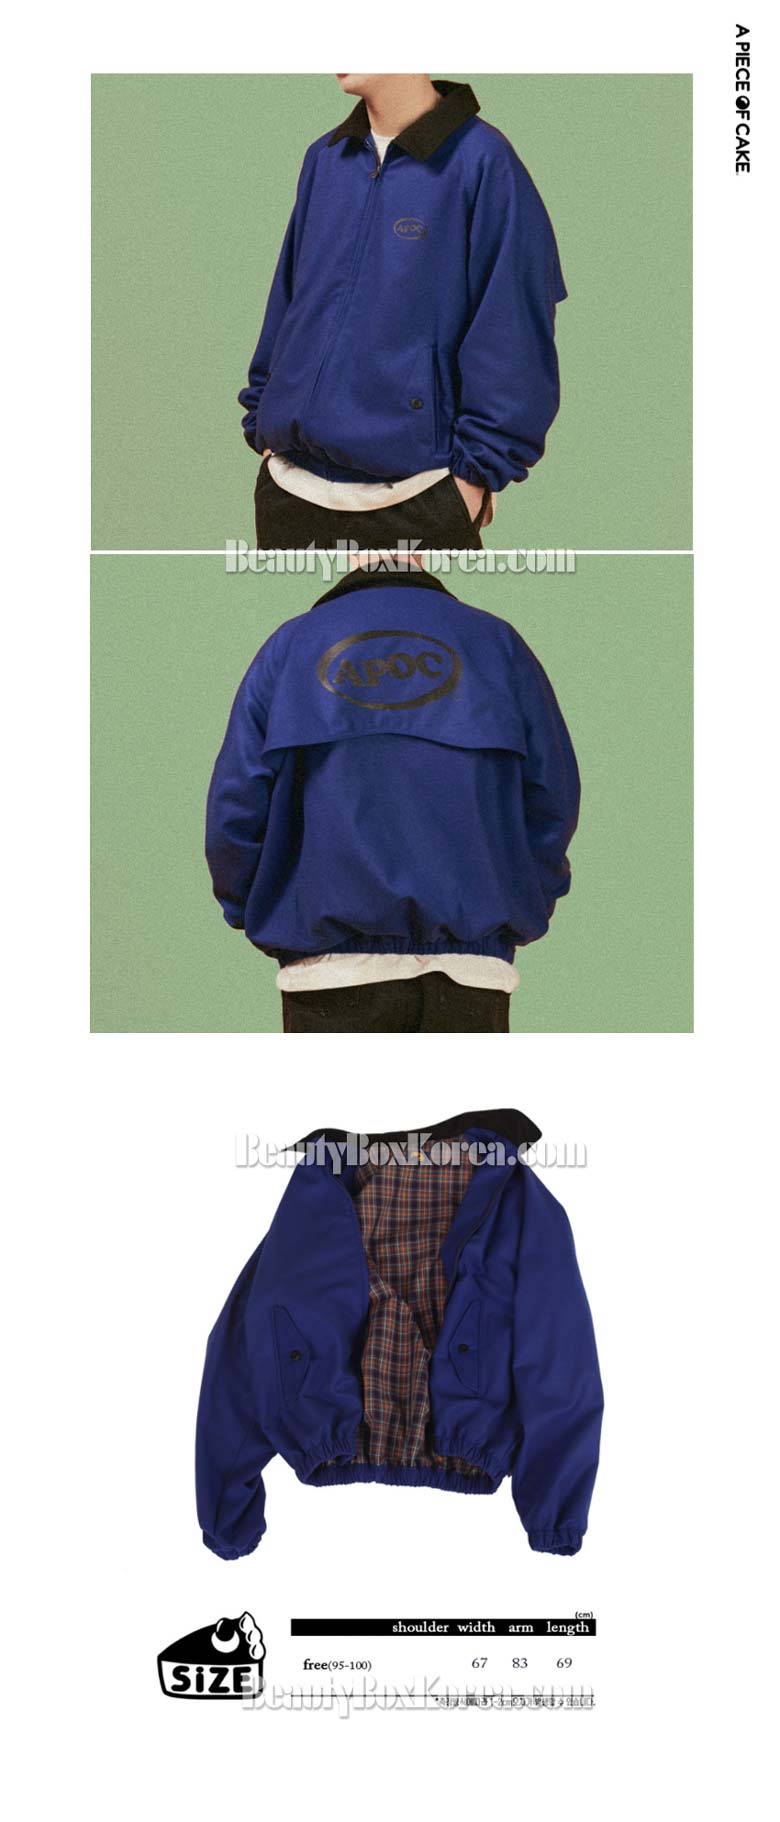 Blue with Yellow Oval Logo - Beauty Box Korea Oval Logo Blouson 1ea. Best Price and Fast